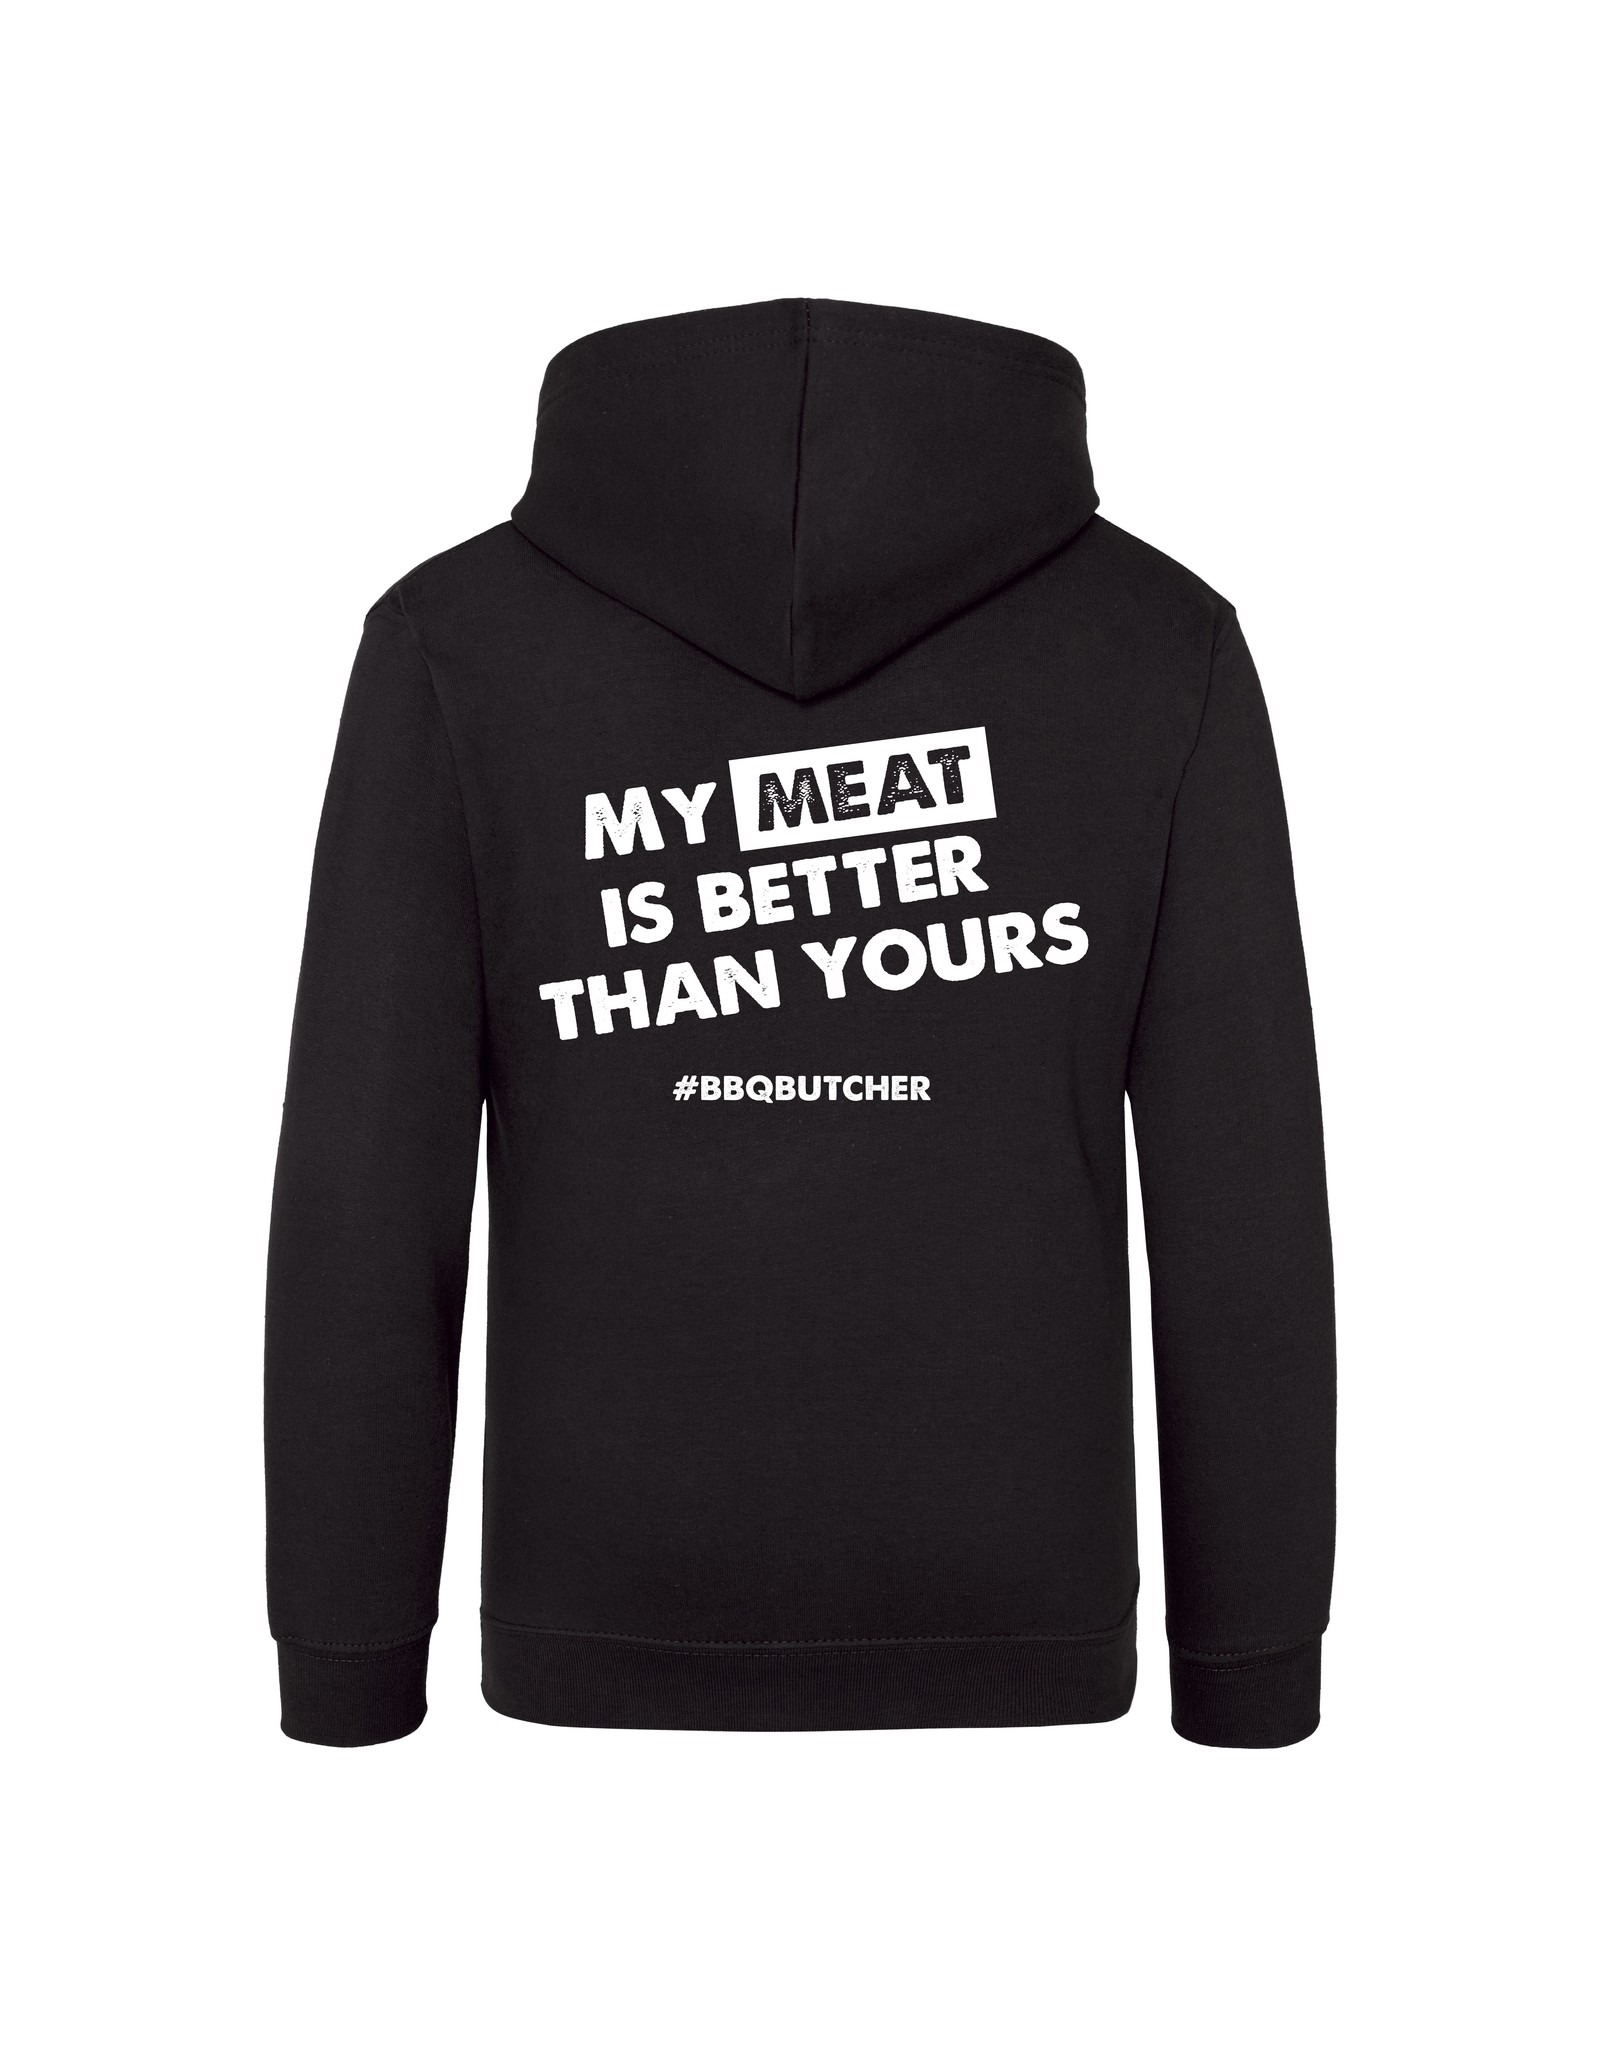 BBQButcher.nl Hoodie "My Meat is Better than Yours"